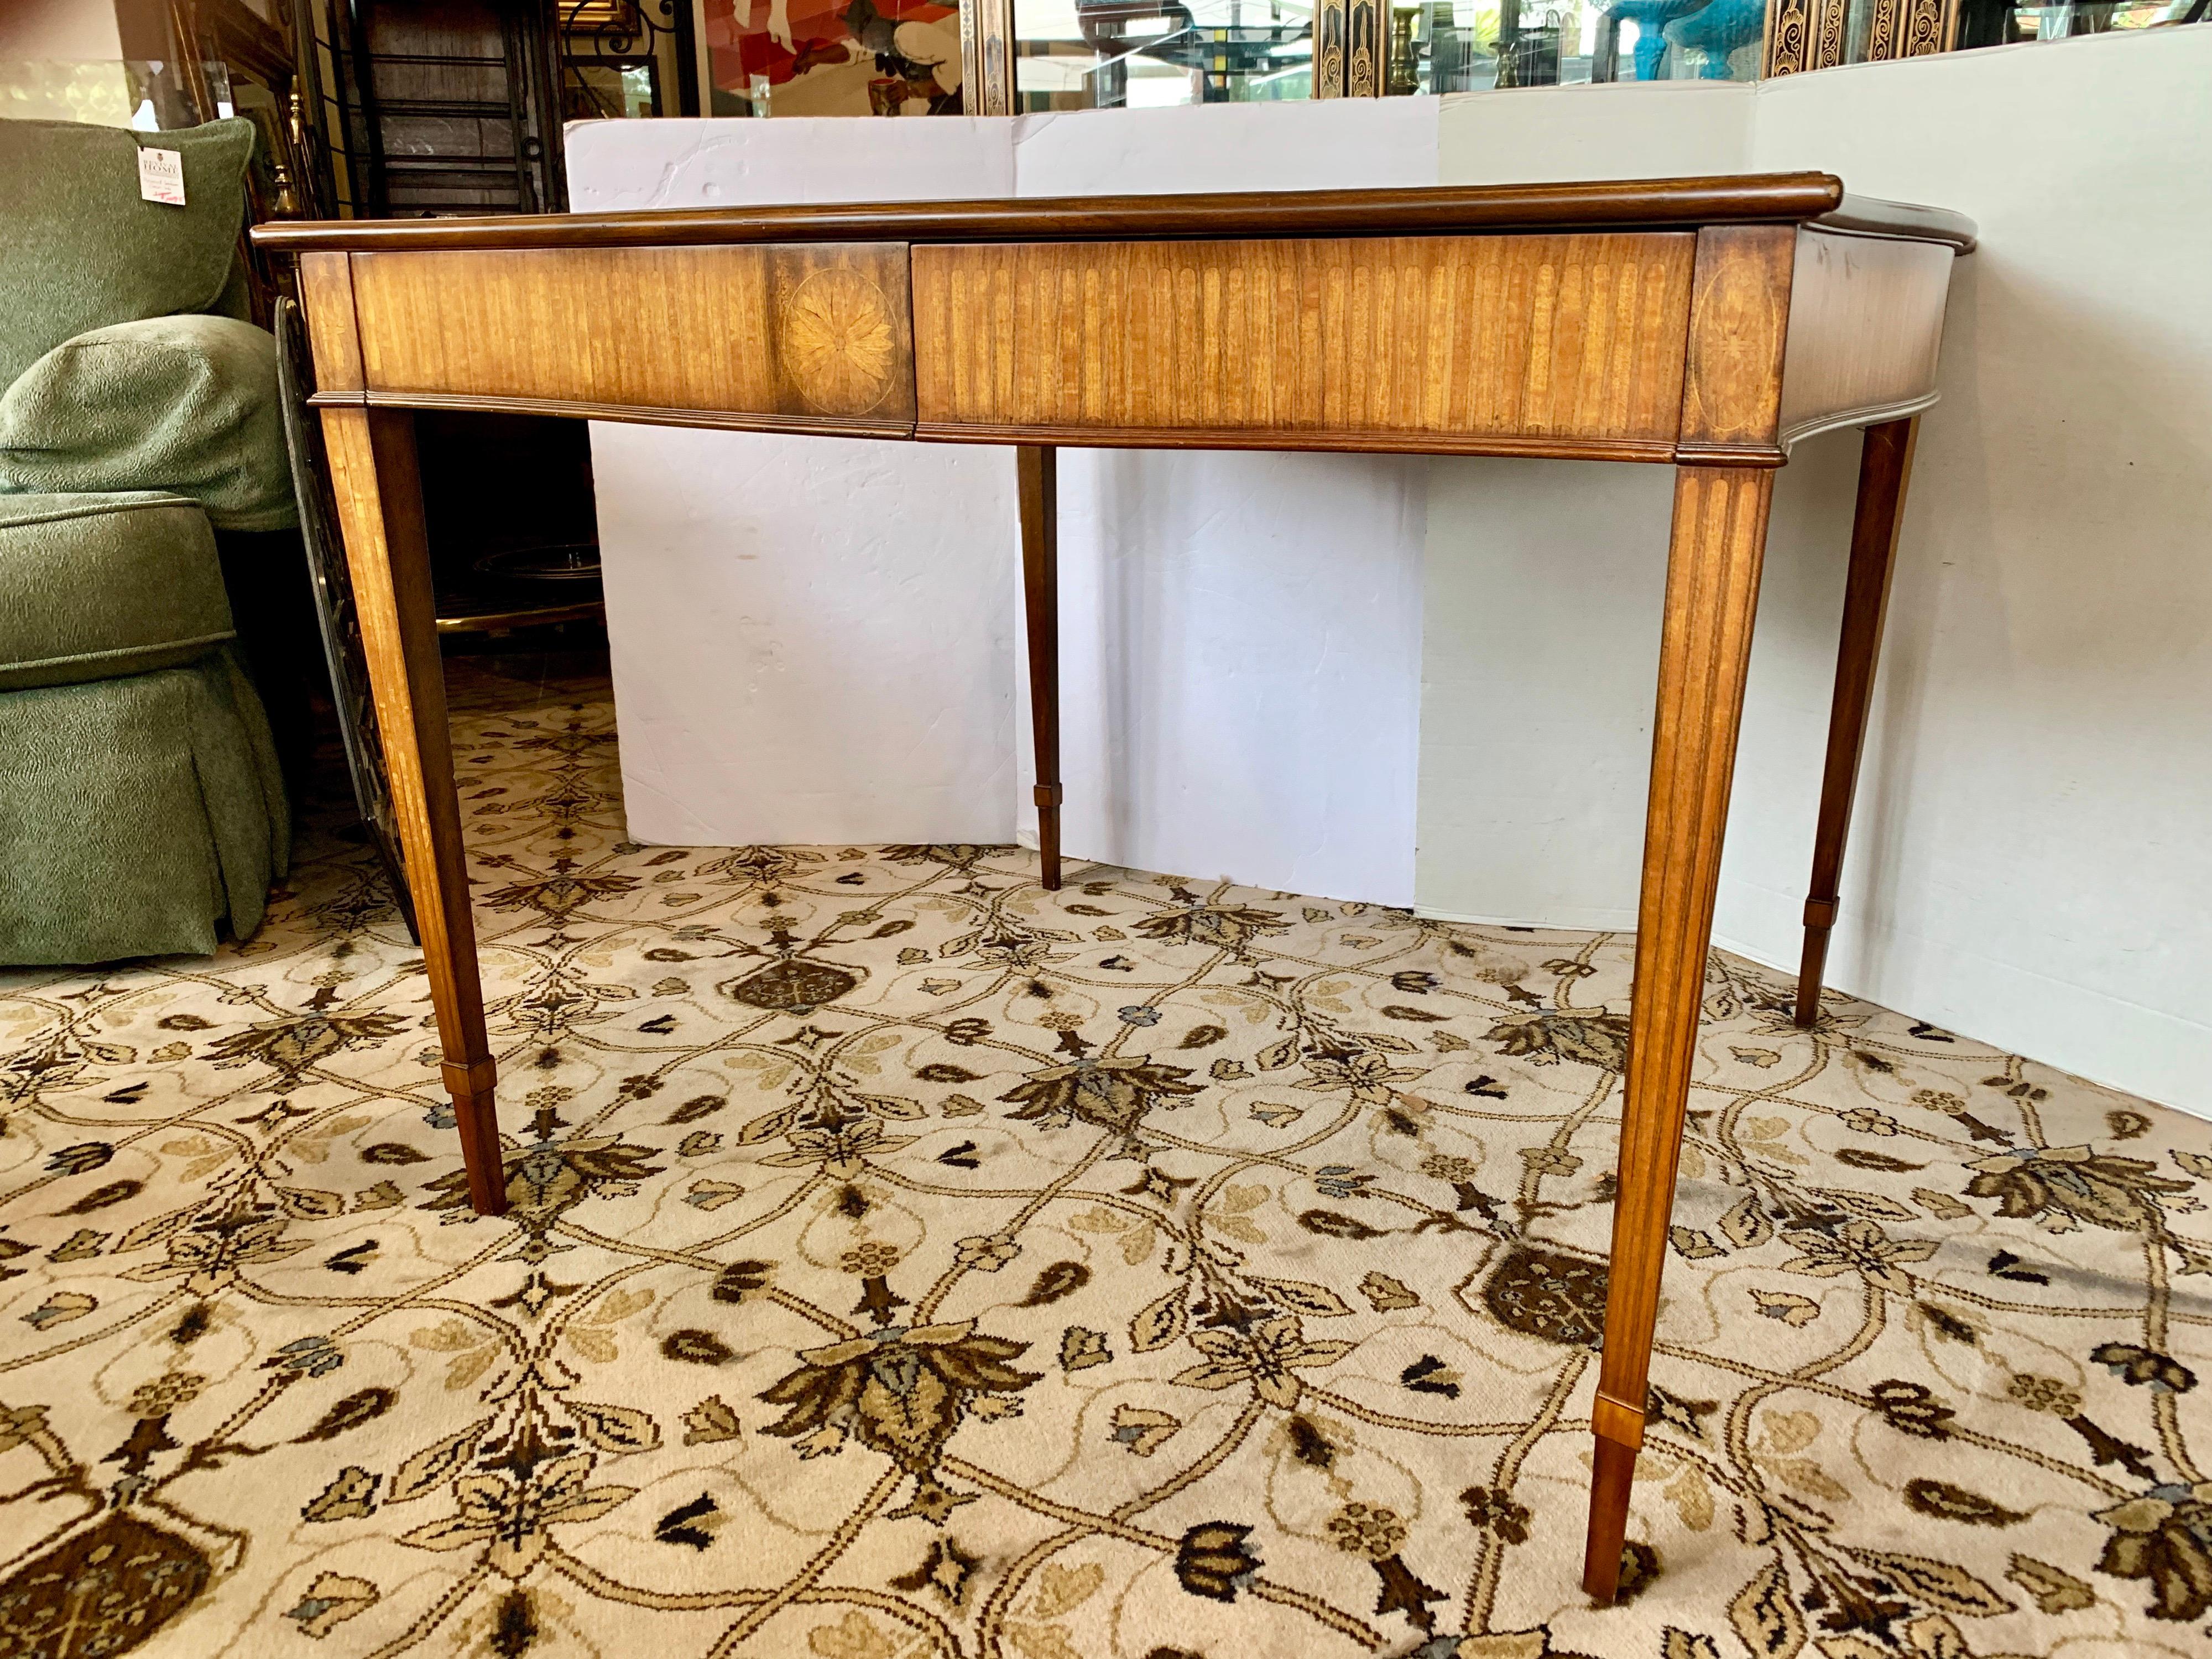 Elegant mahogany signed Maitland Smith large game table with drawer on all four side. Features leather top and carved legs. All maker hallmarks are at bottom of table. Would work great in a study, library, game room or office. Use as a game table or